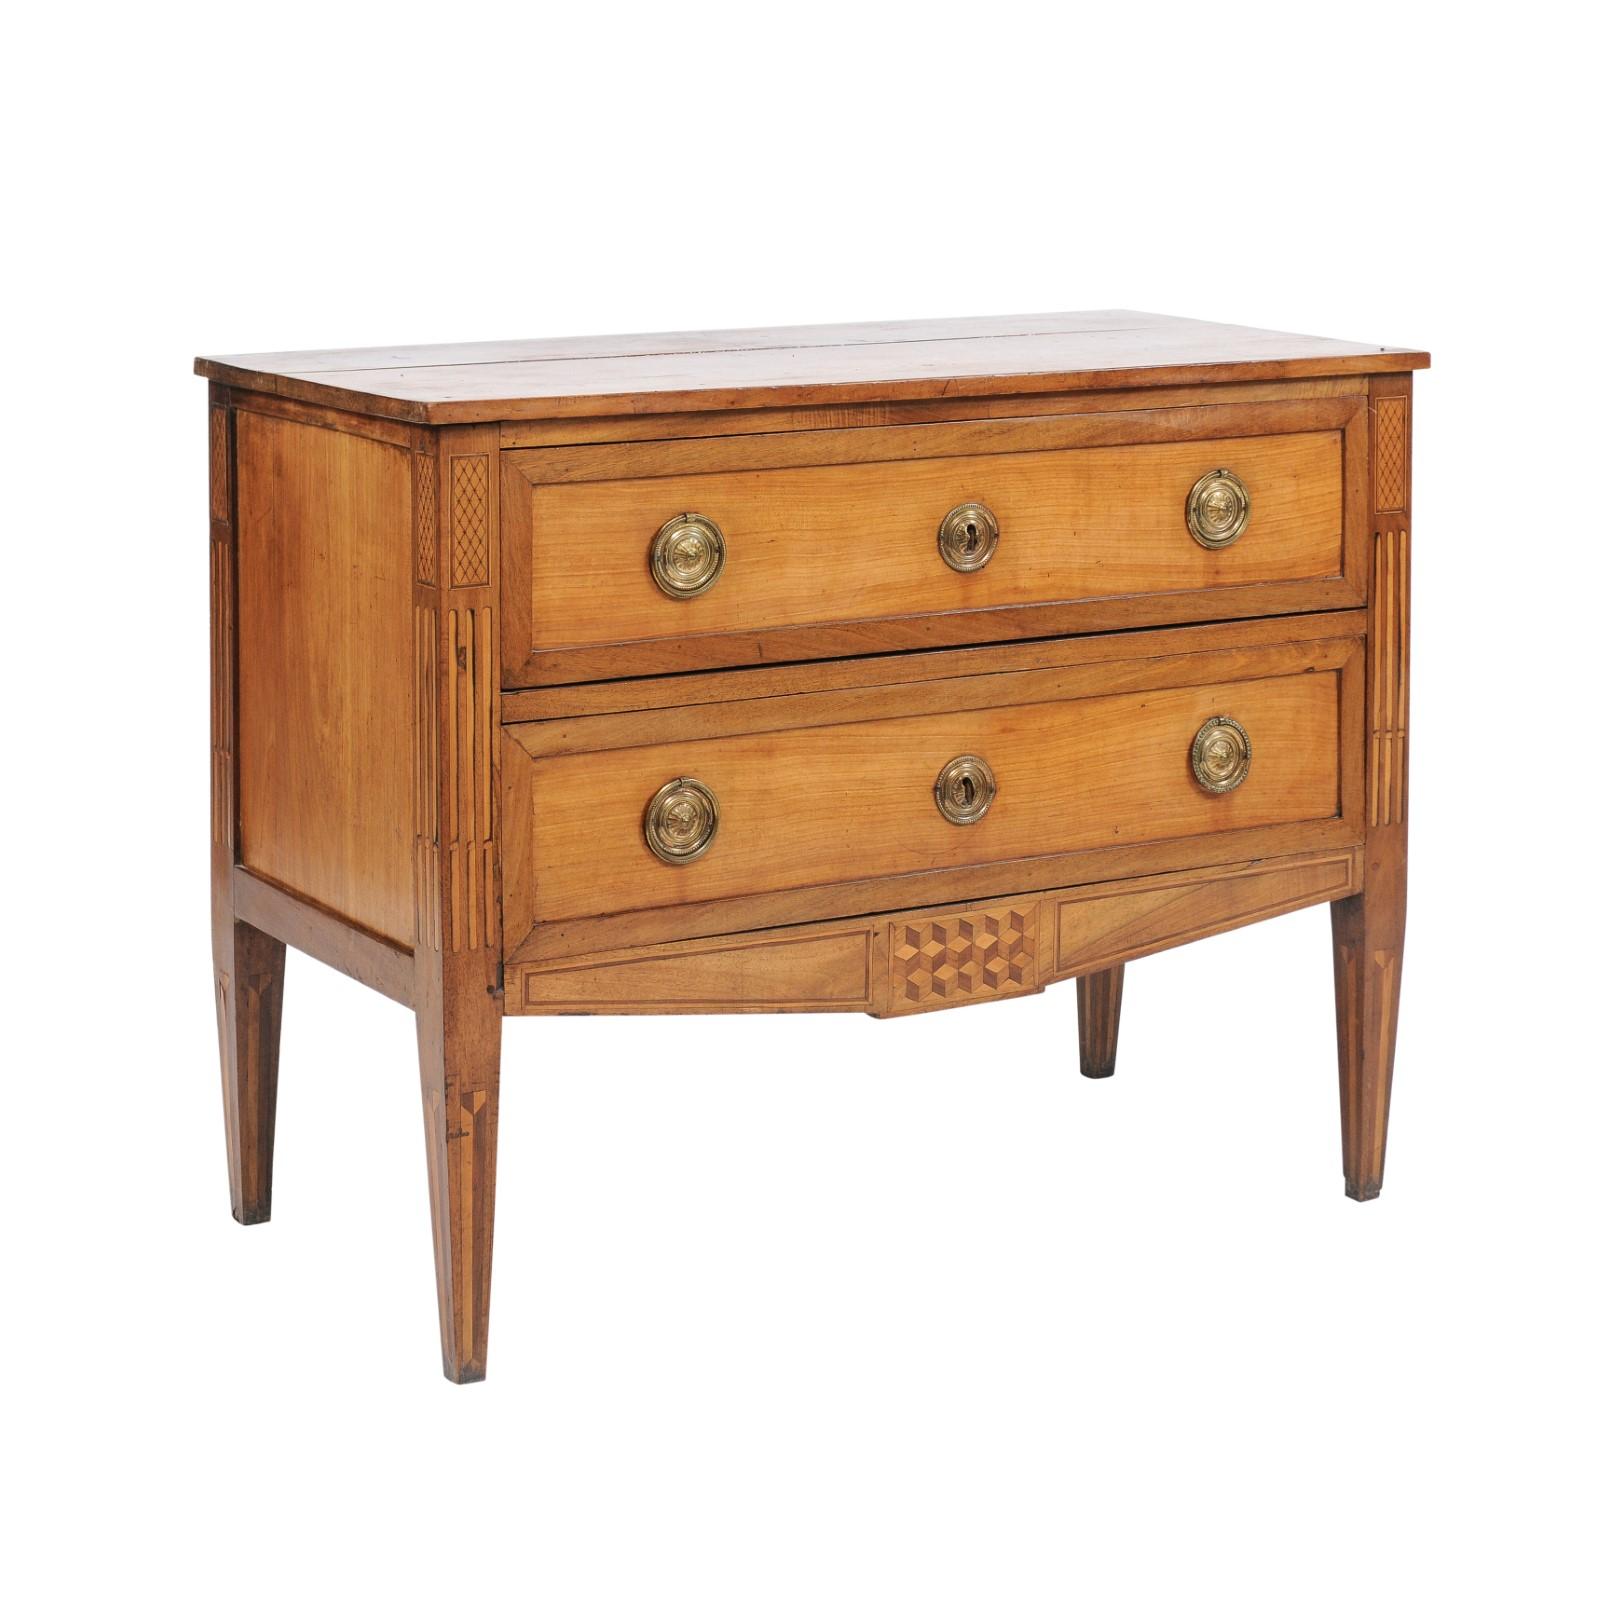 French Louis XVI Style Pine Two-Drawer Commode with Walnut Marquetry Accents